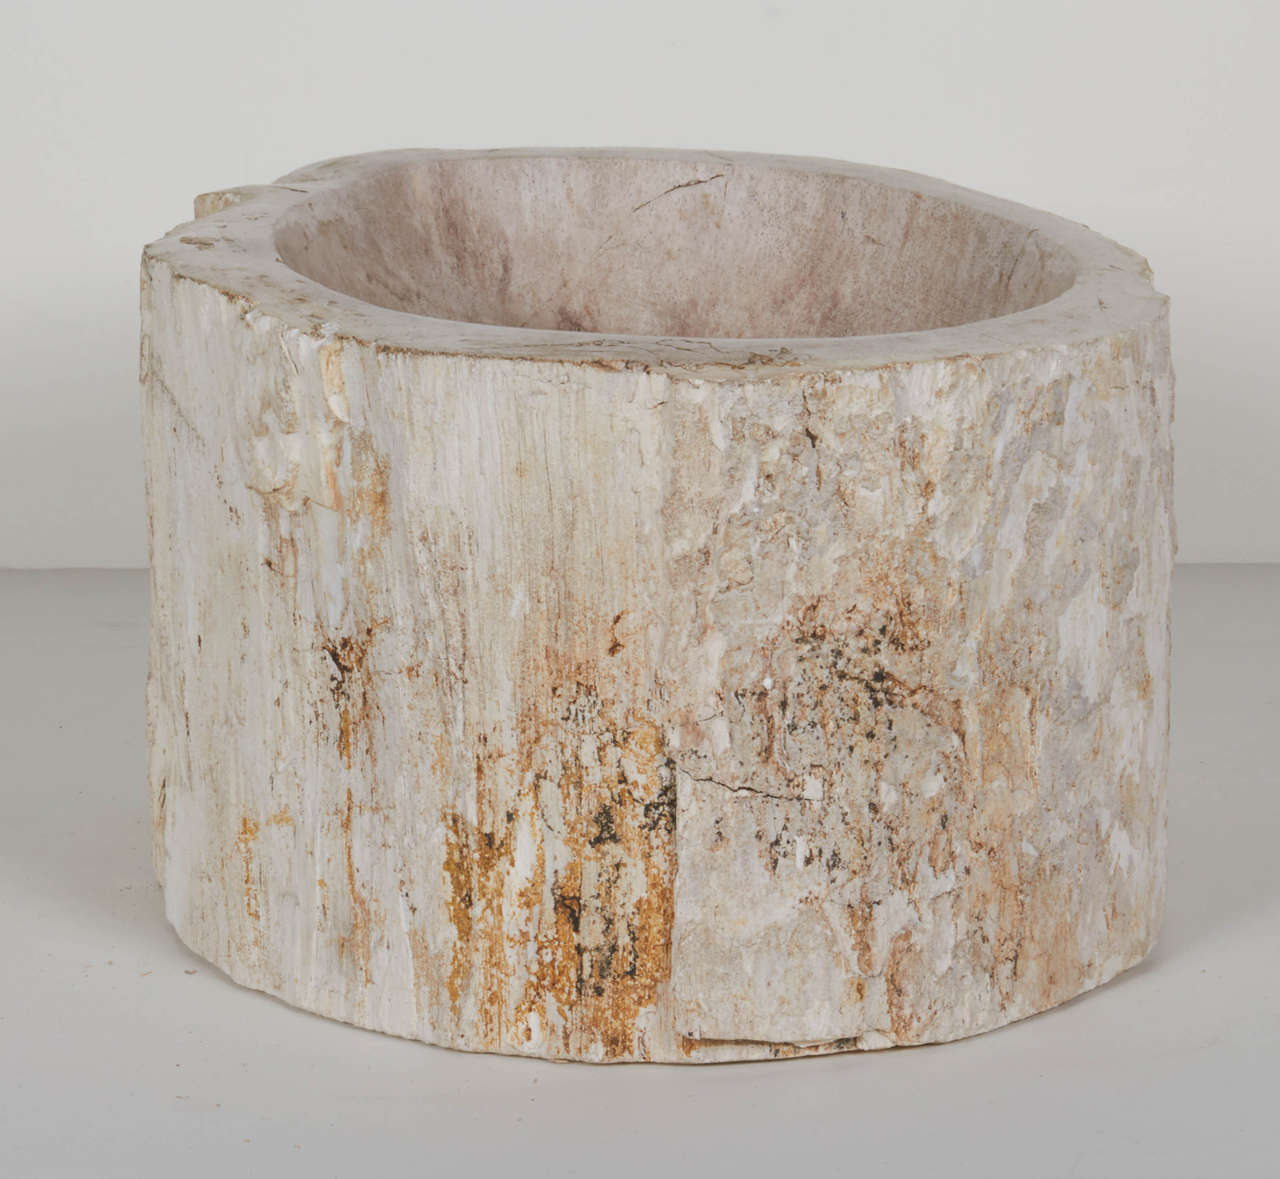 Organic petrified wood large bowl or sink with amorphous form. Naturally fossilized throughout hundreds of years. These rare pieces have been hand-cut and feature the highest quality petrified wood with deep polished centres and tall sides with